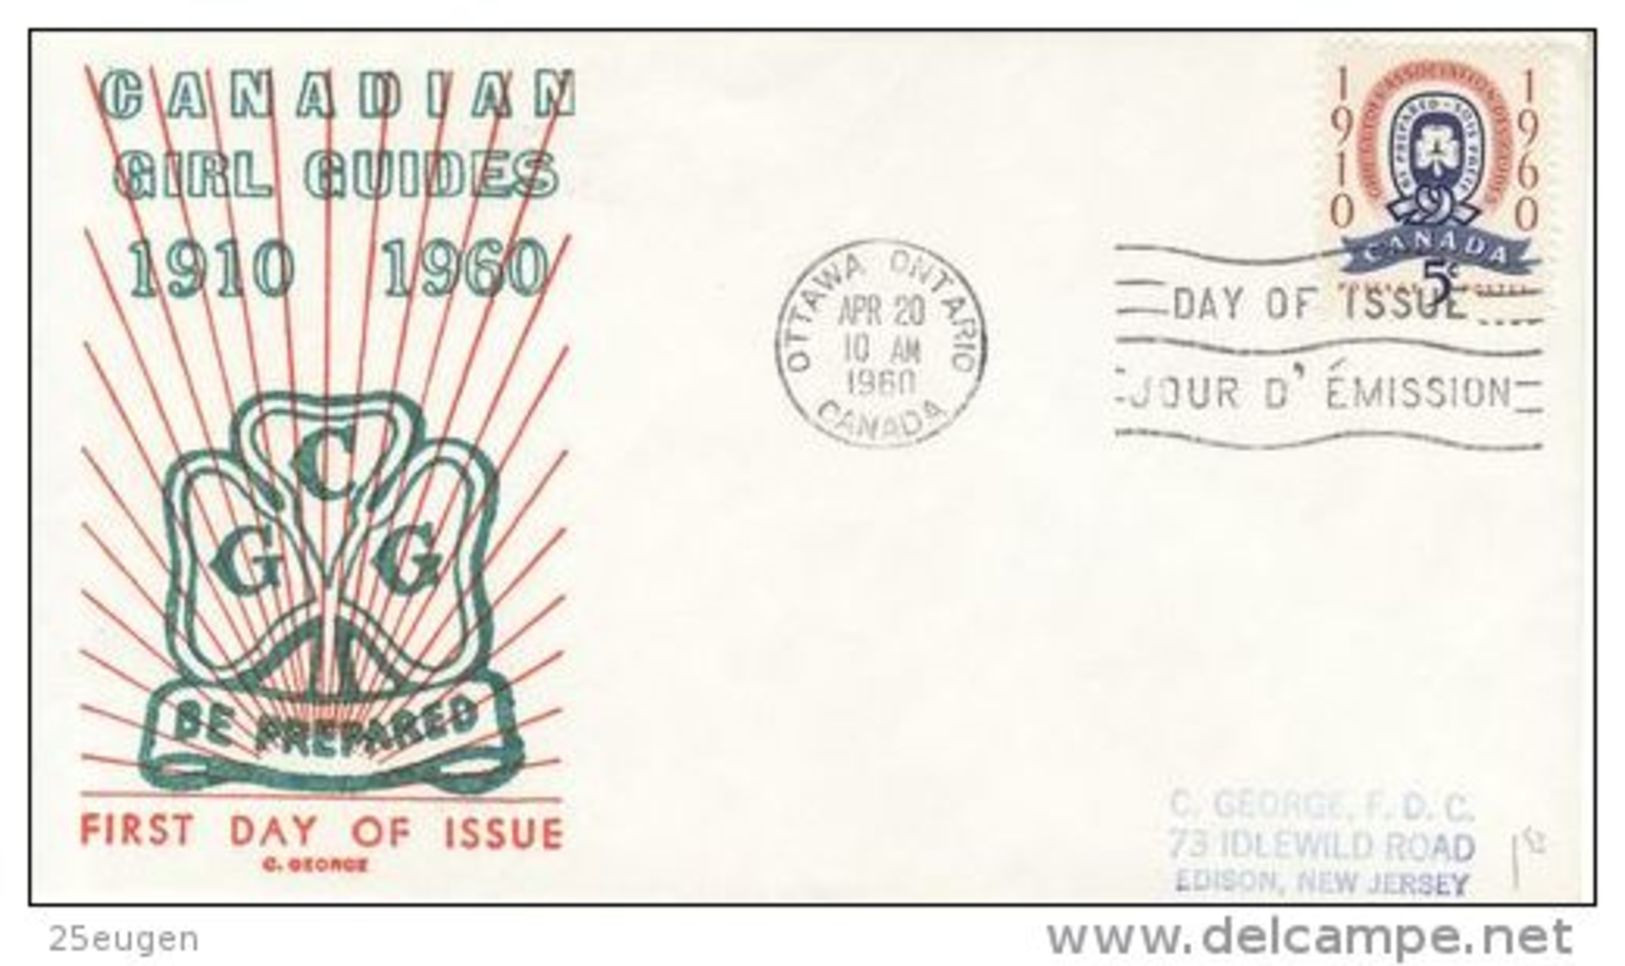 CANADA 1960 CANADIAN GIRL GUIDES FDC - 1952-1960